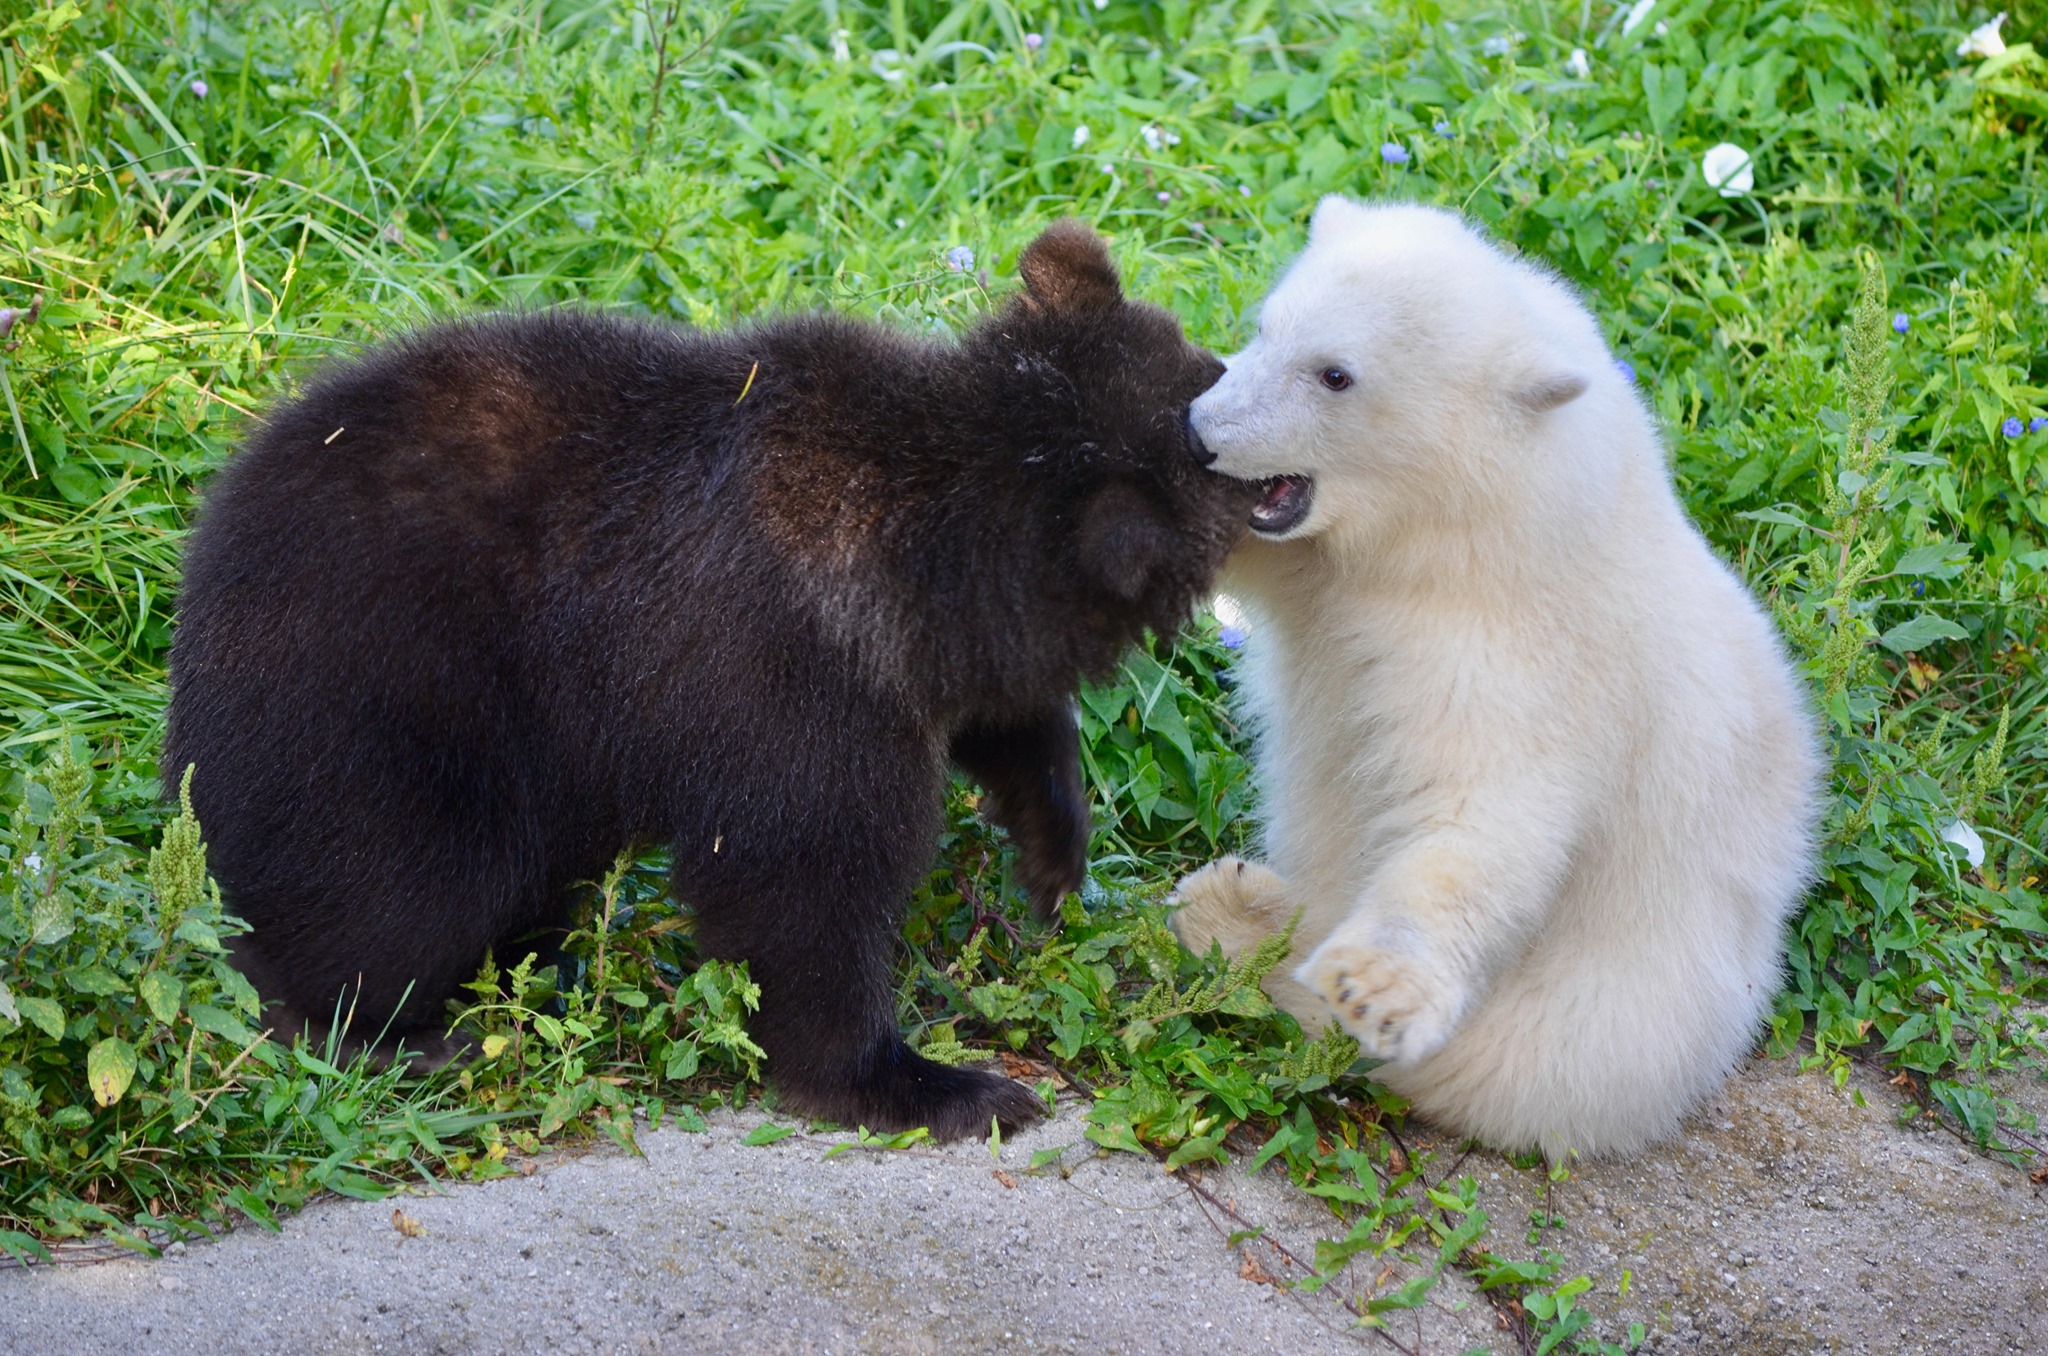 grizzly bear cub and a polar bear cub playing in a grassy area